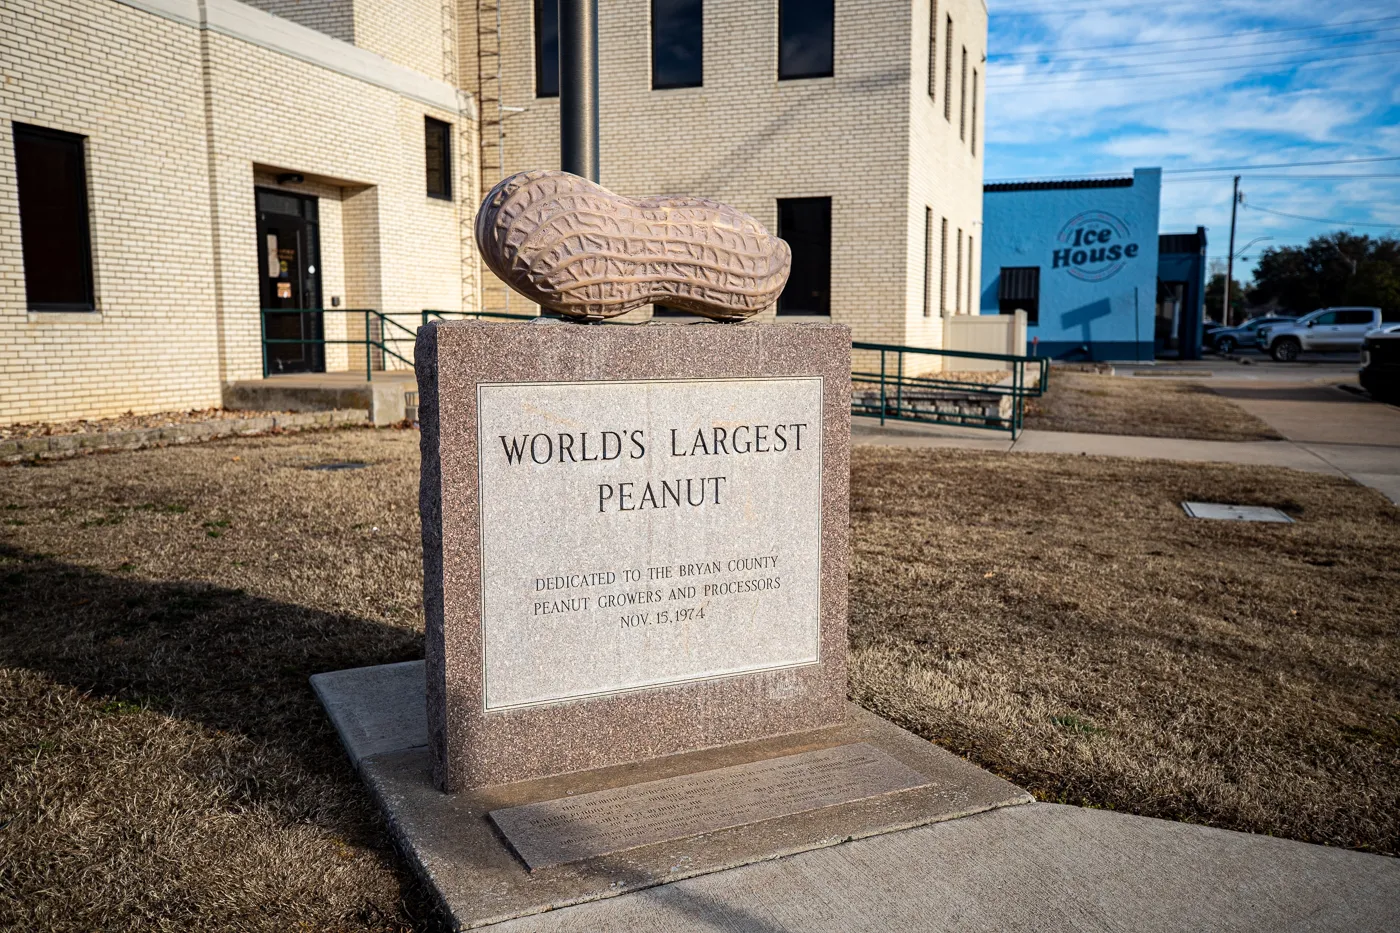 World's Largest Peanut in Durant, Oklahoma roadside attraction